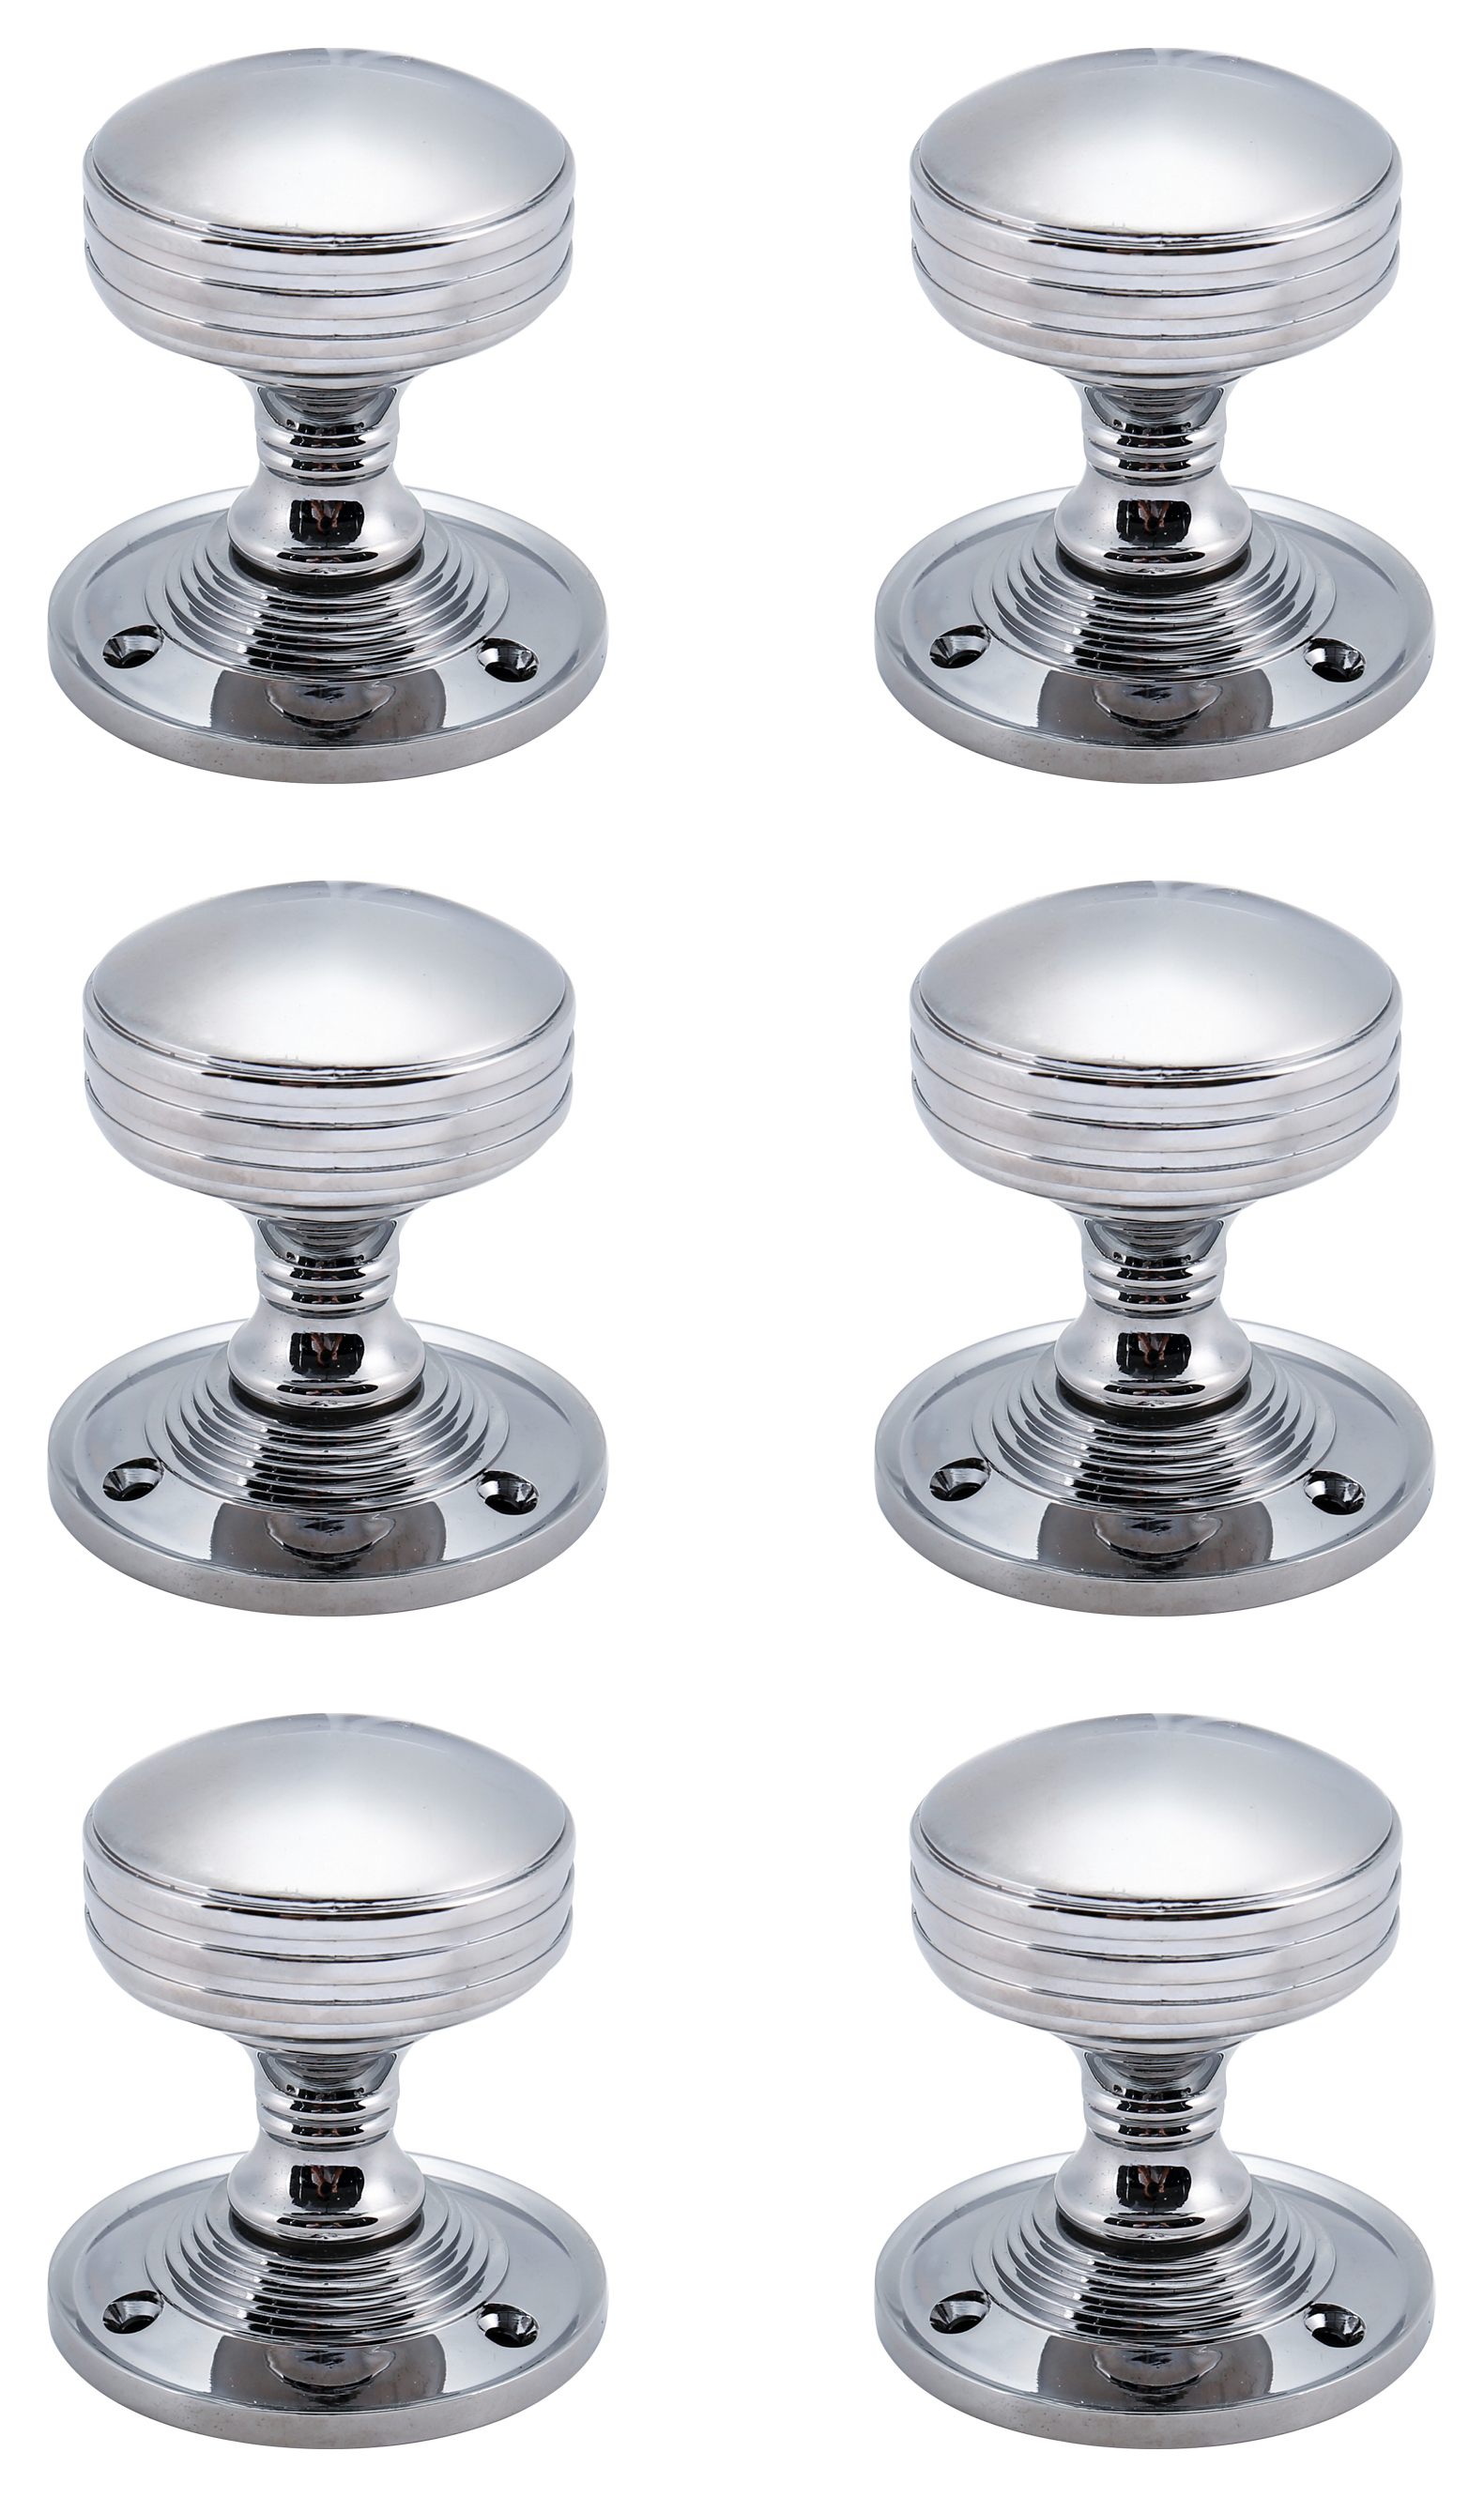 Rimmed Mortice Polished Chrome Door Knob - 3 Pairs